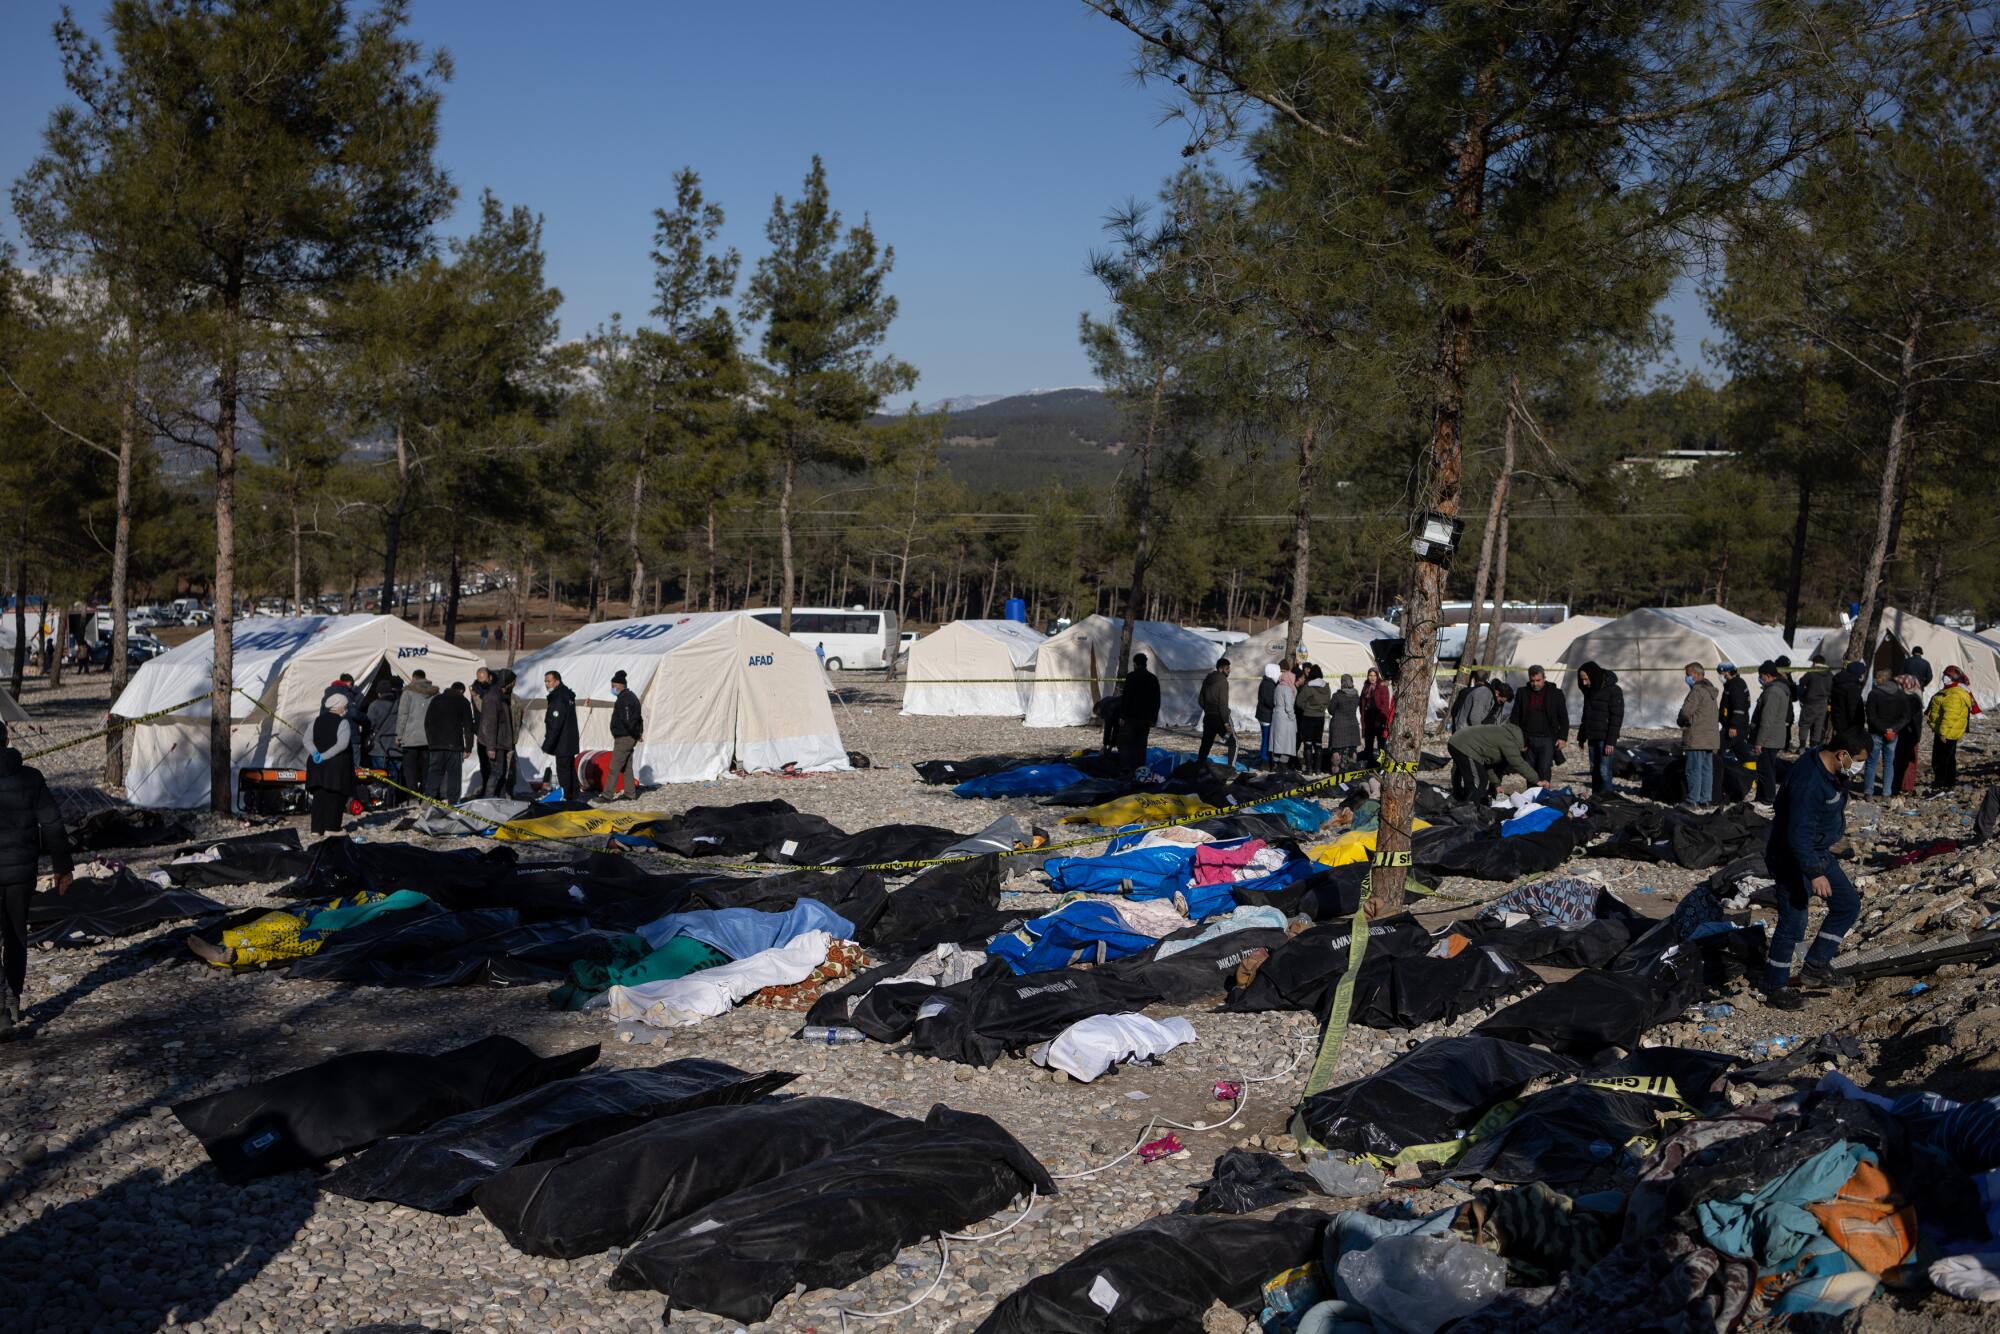 Bodies in black bags and other coverings lying on the ground as people mill around several white tents under evergreen trees